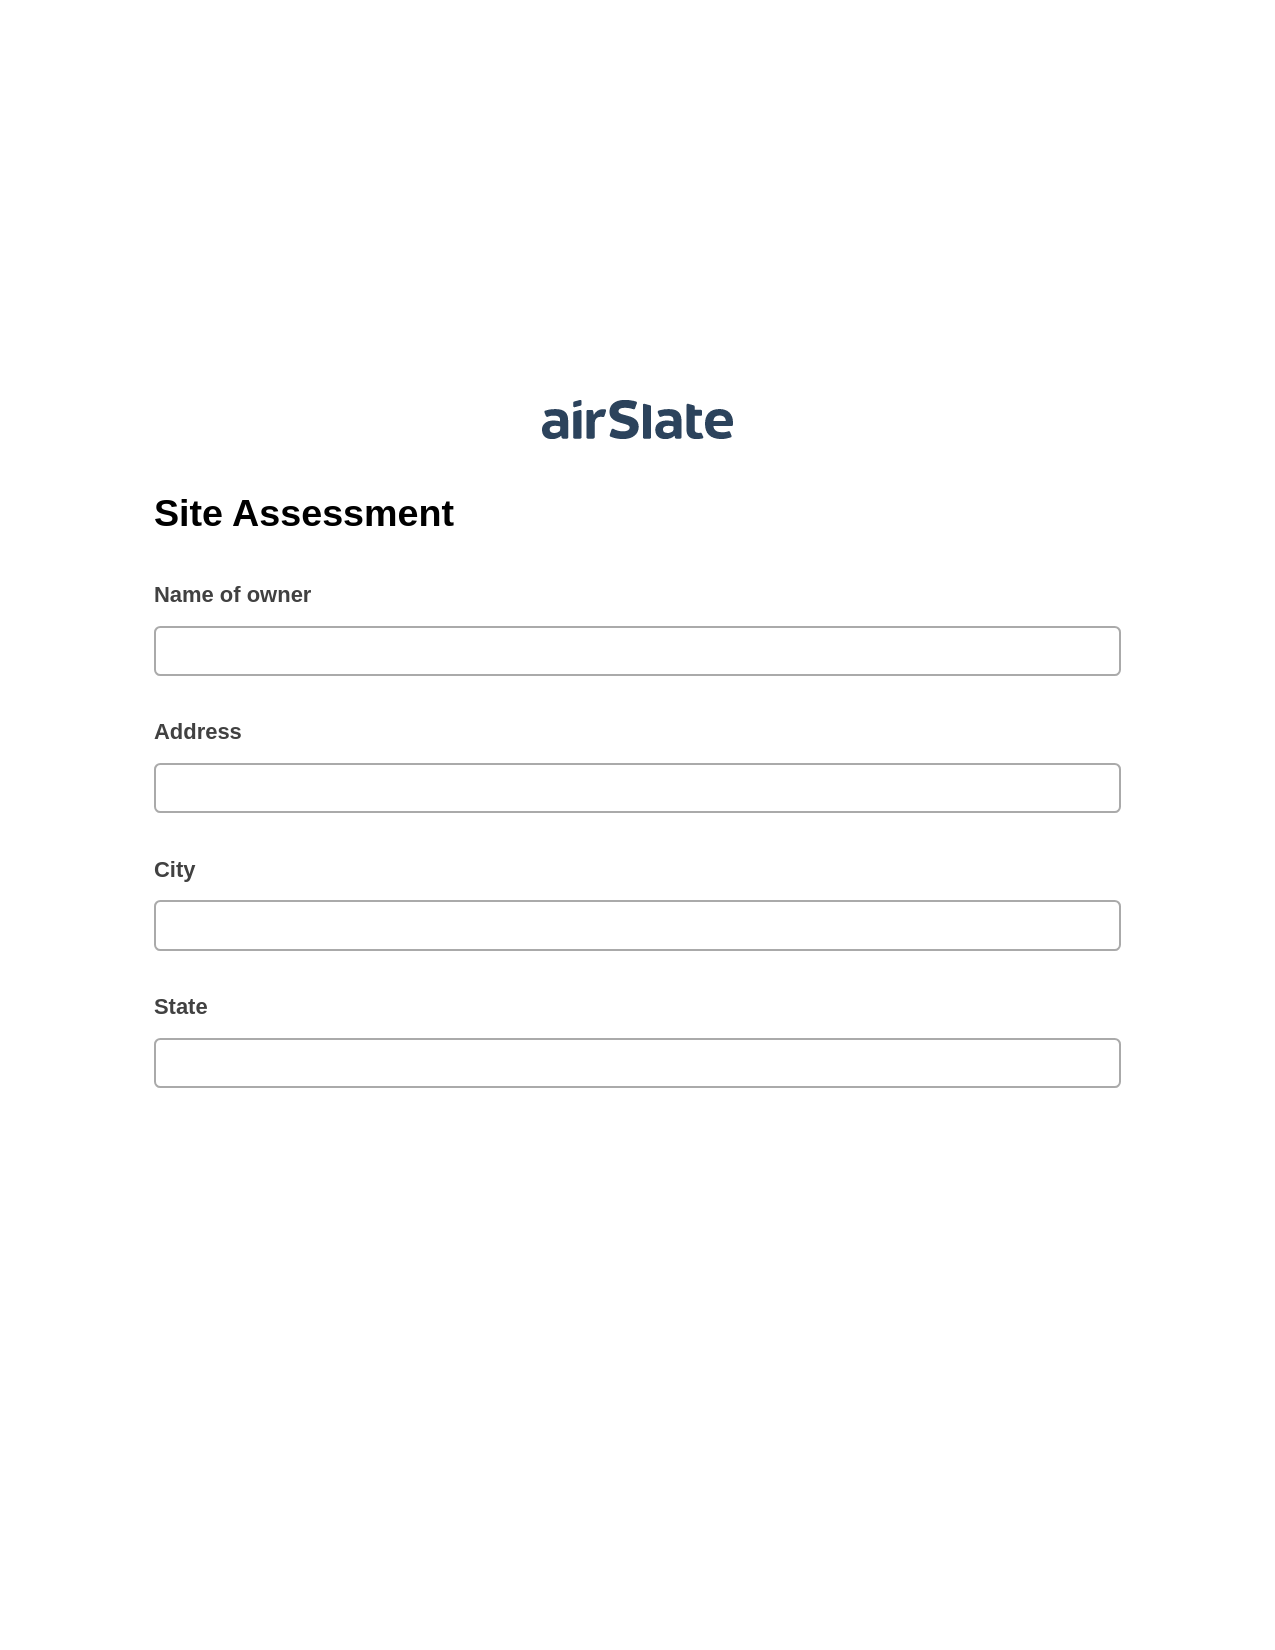 Site Assessment Pre-fill from CSV File Bot, Create MS Dynamics 365 Records Bot, Export to Google Sheet Bot